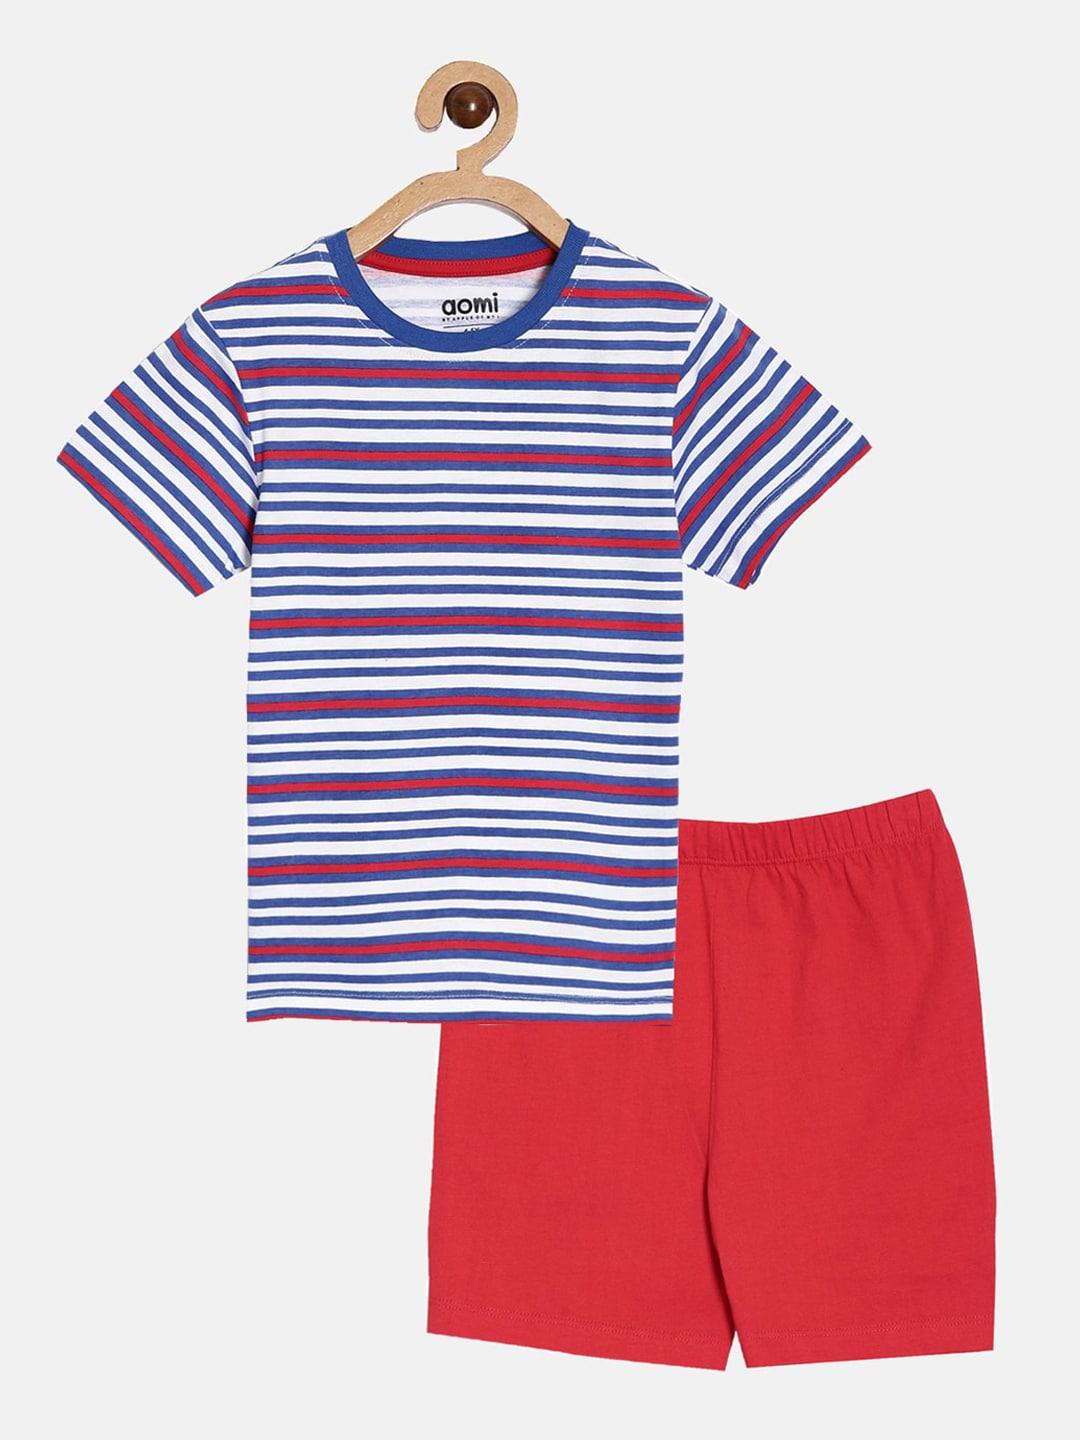 Aomi Boys Blue & Red Printed T-shirt with Shorts